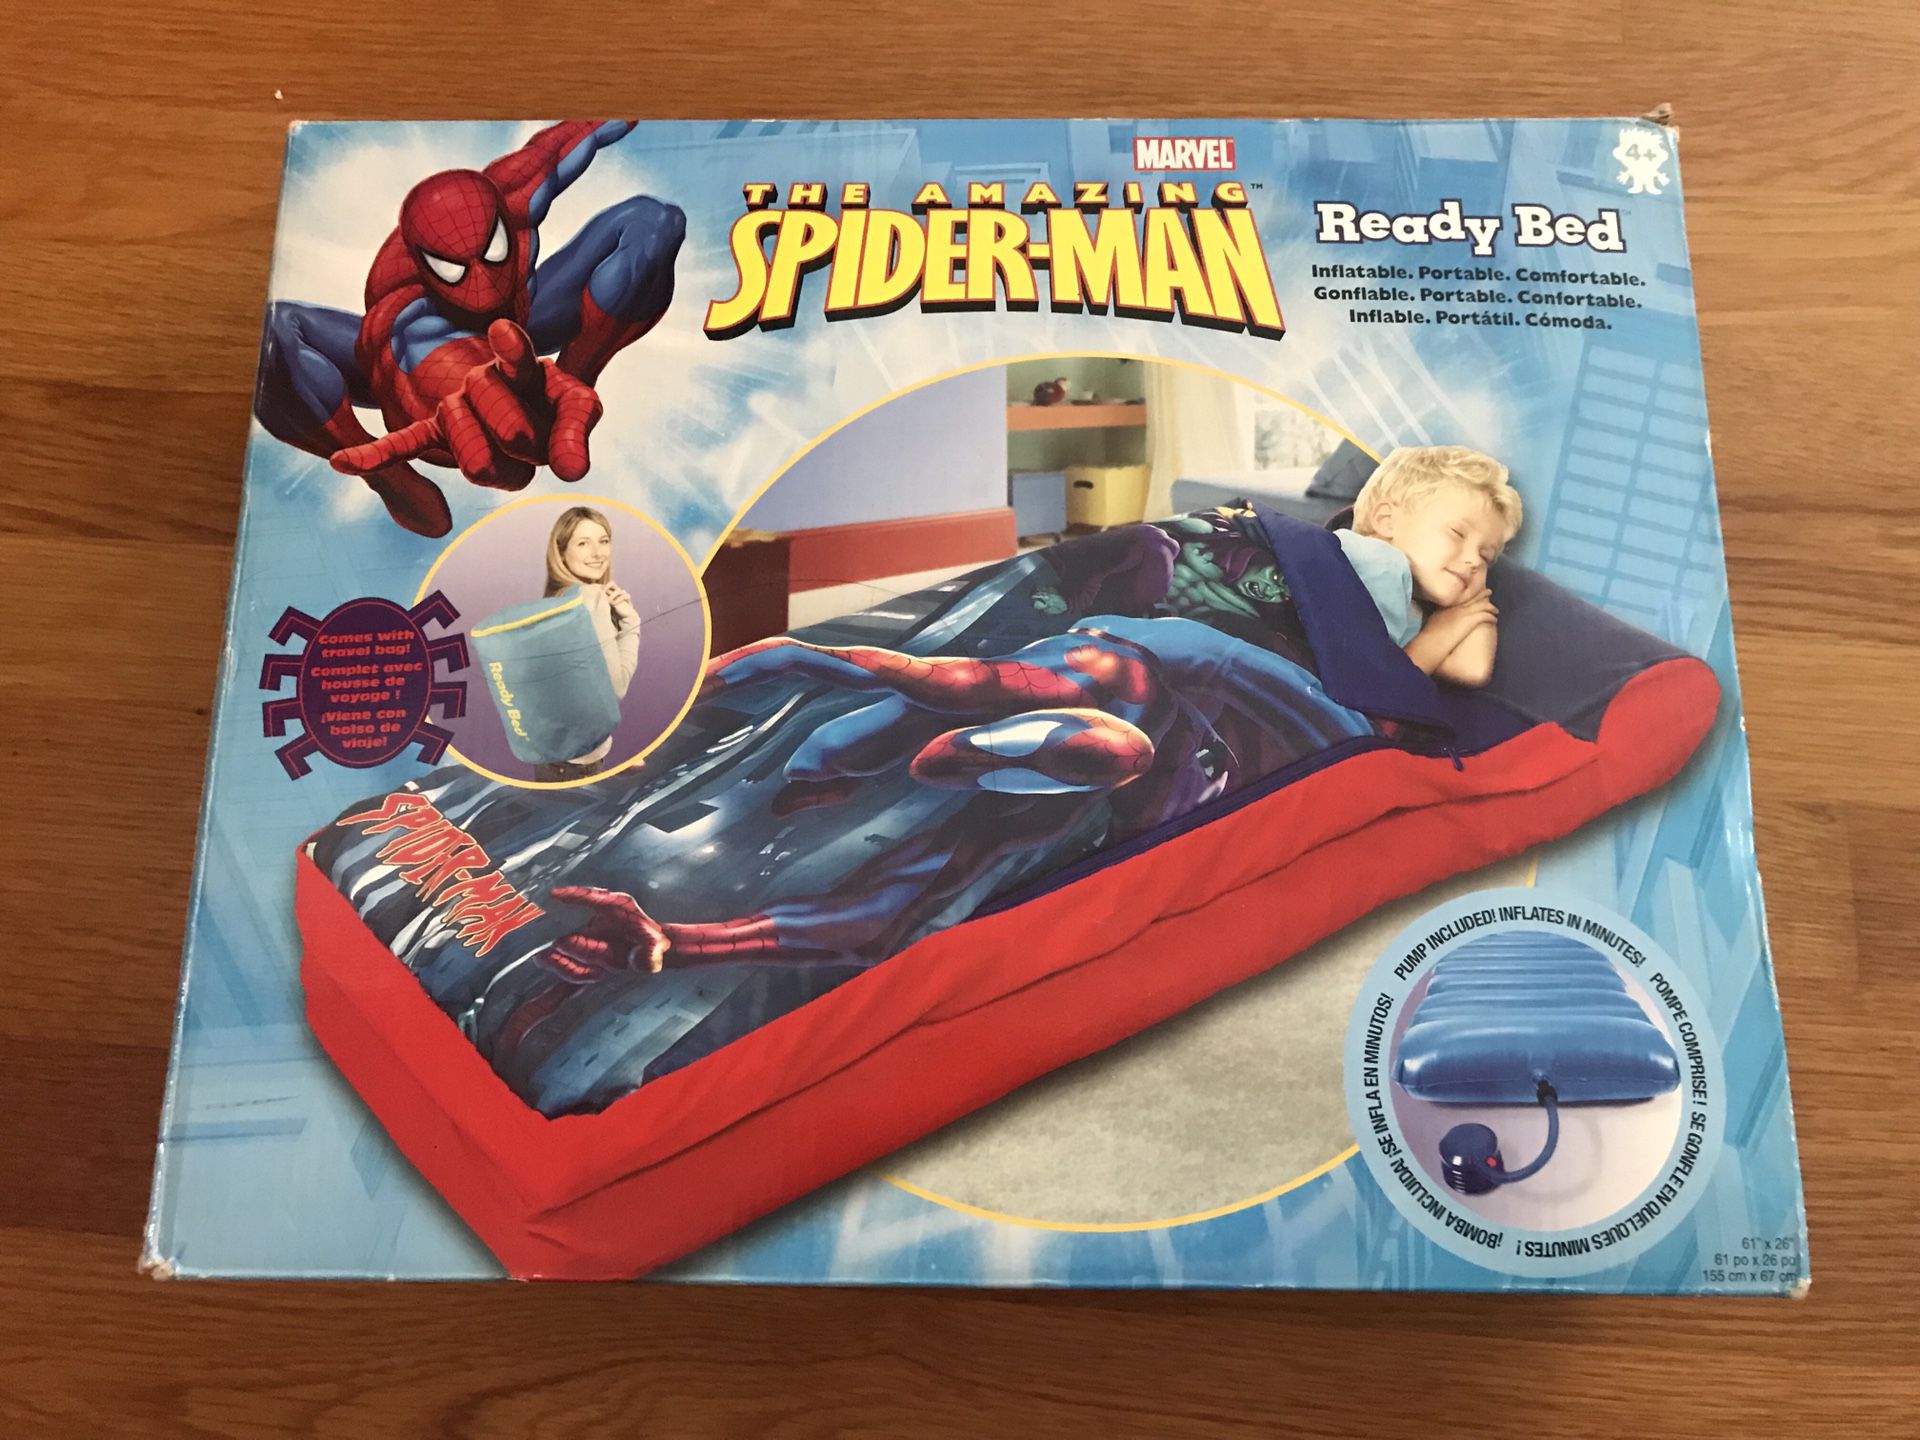 New in box Spider-Man inflatable, Portable comfortable sleeping bag pump included. Can be a chair and bed nice Gift